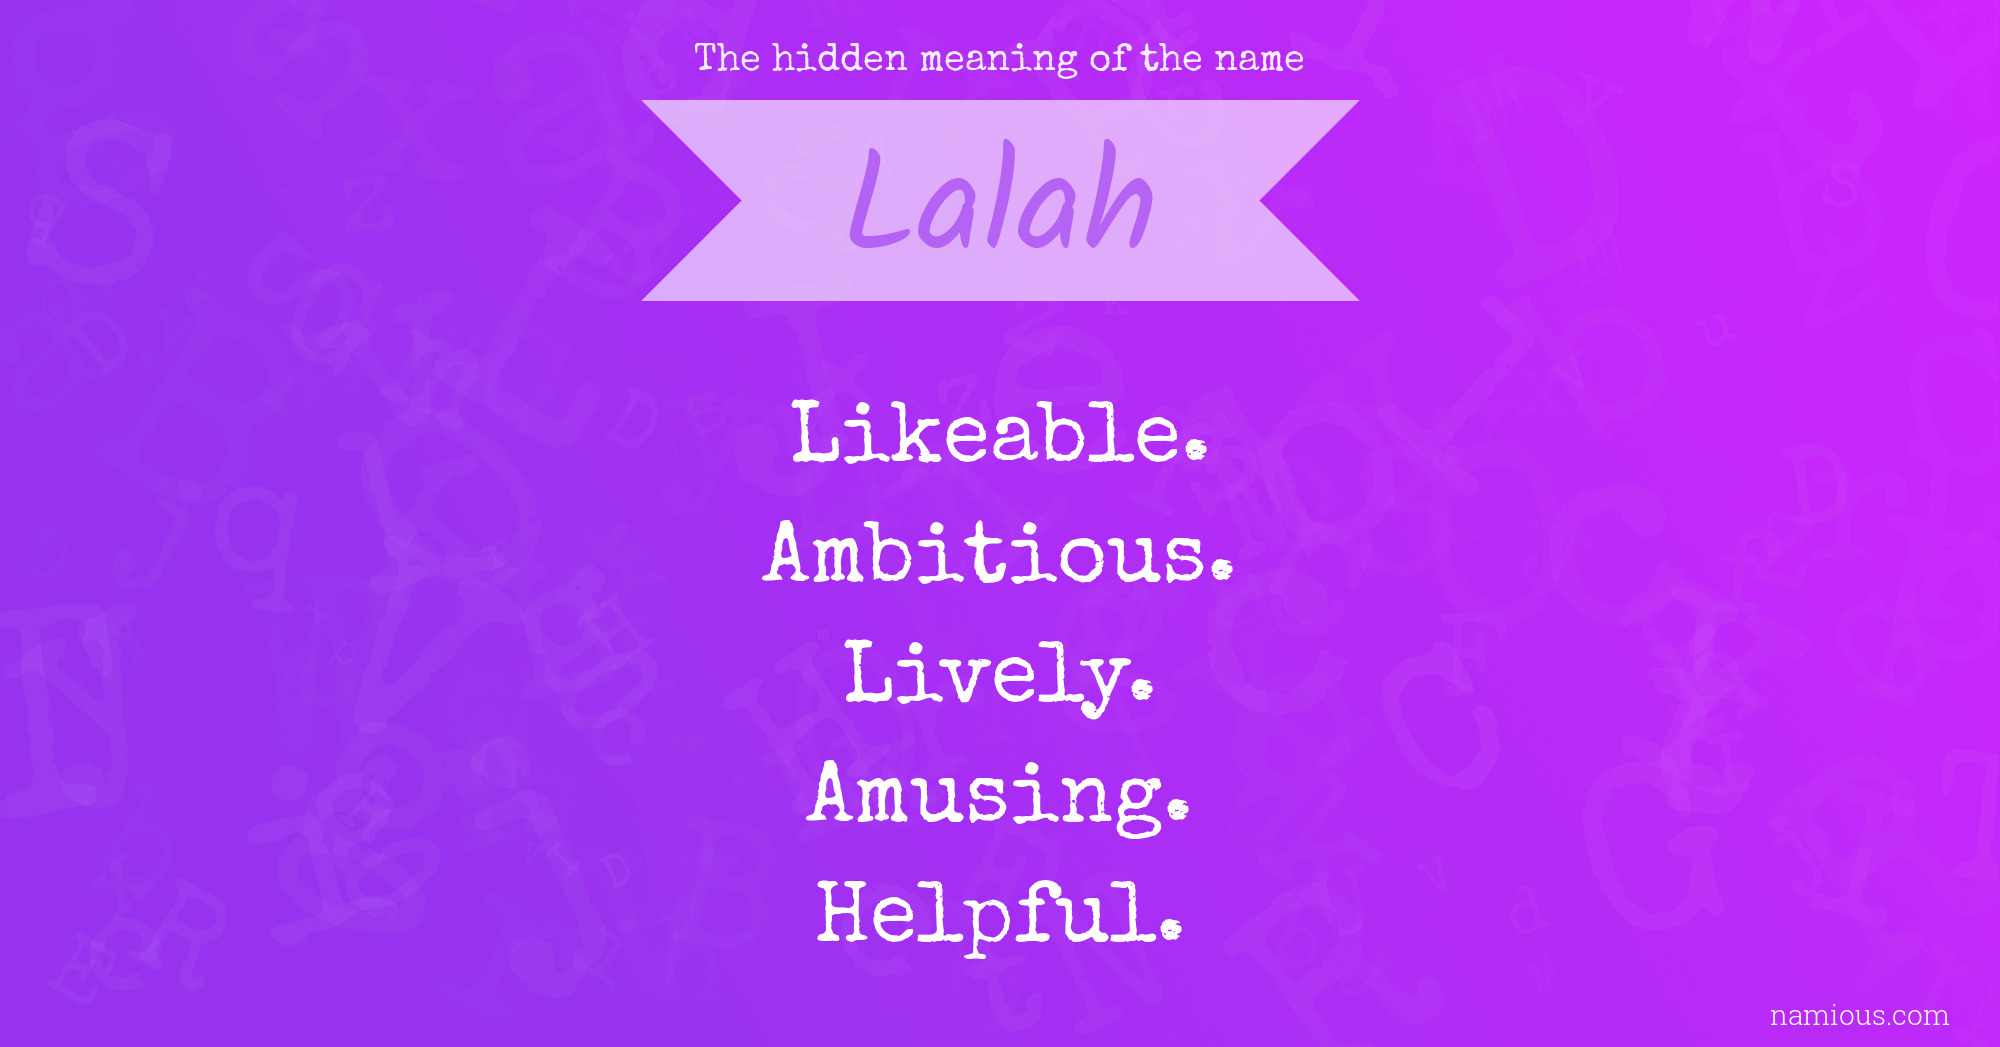 The hidden meaning of the name Lalah